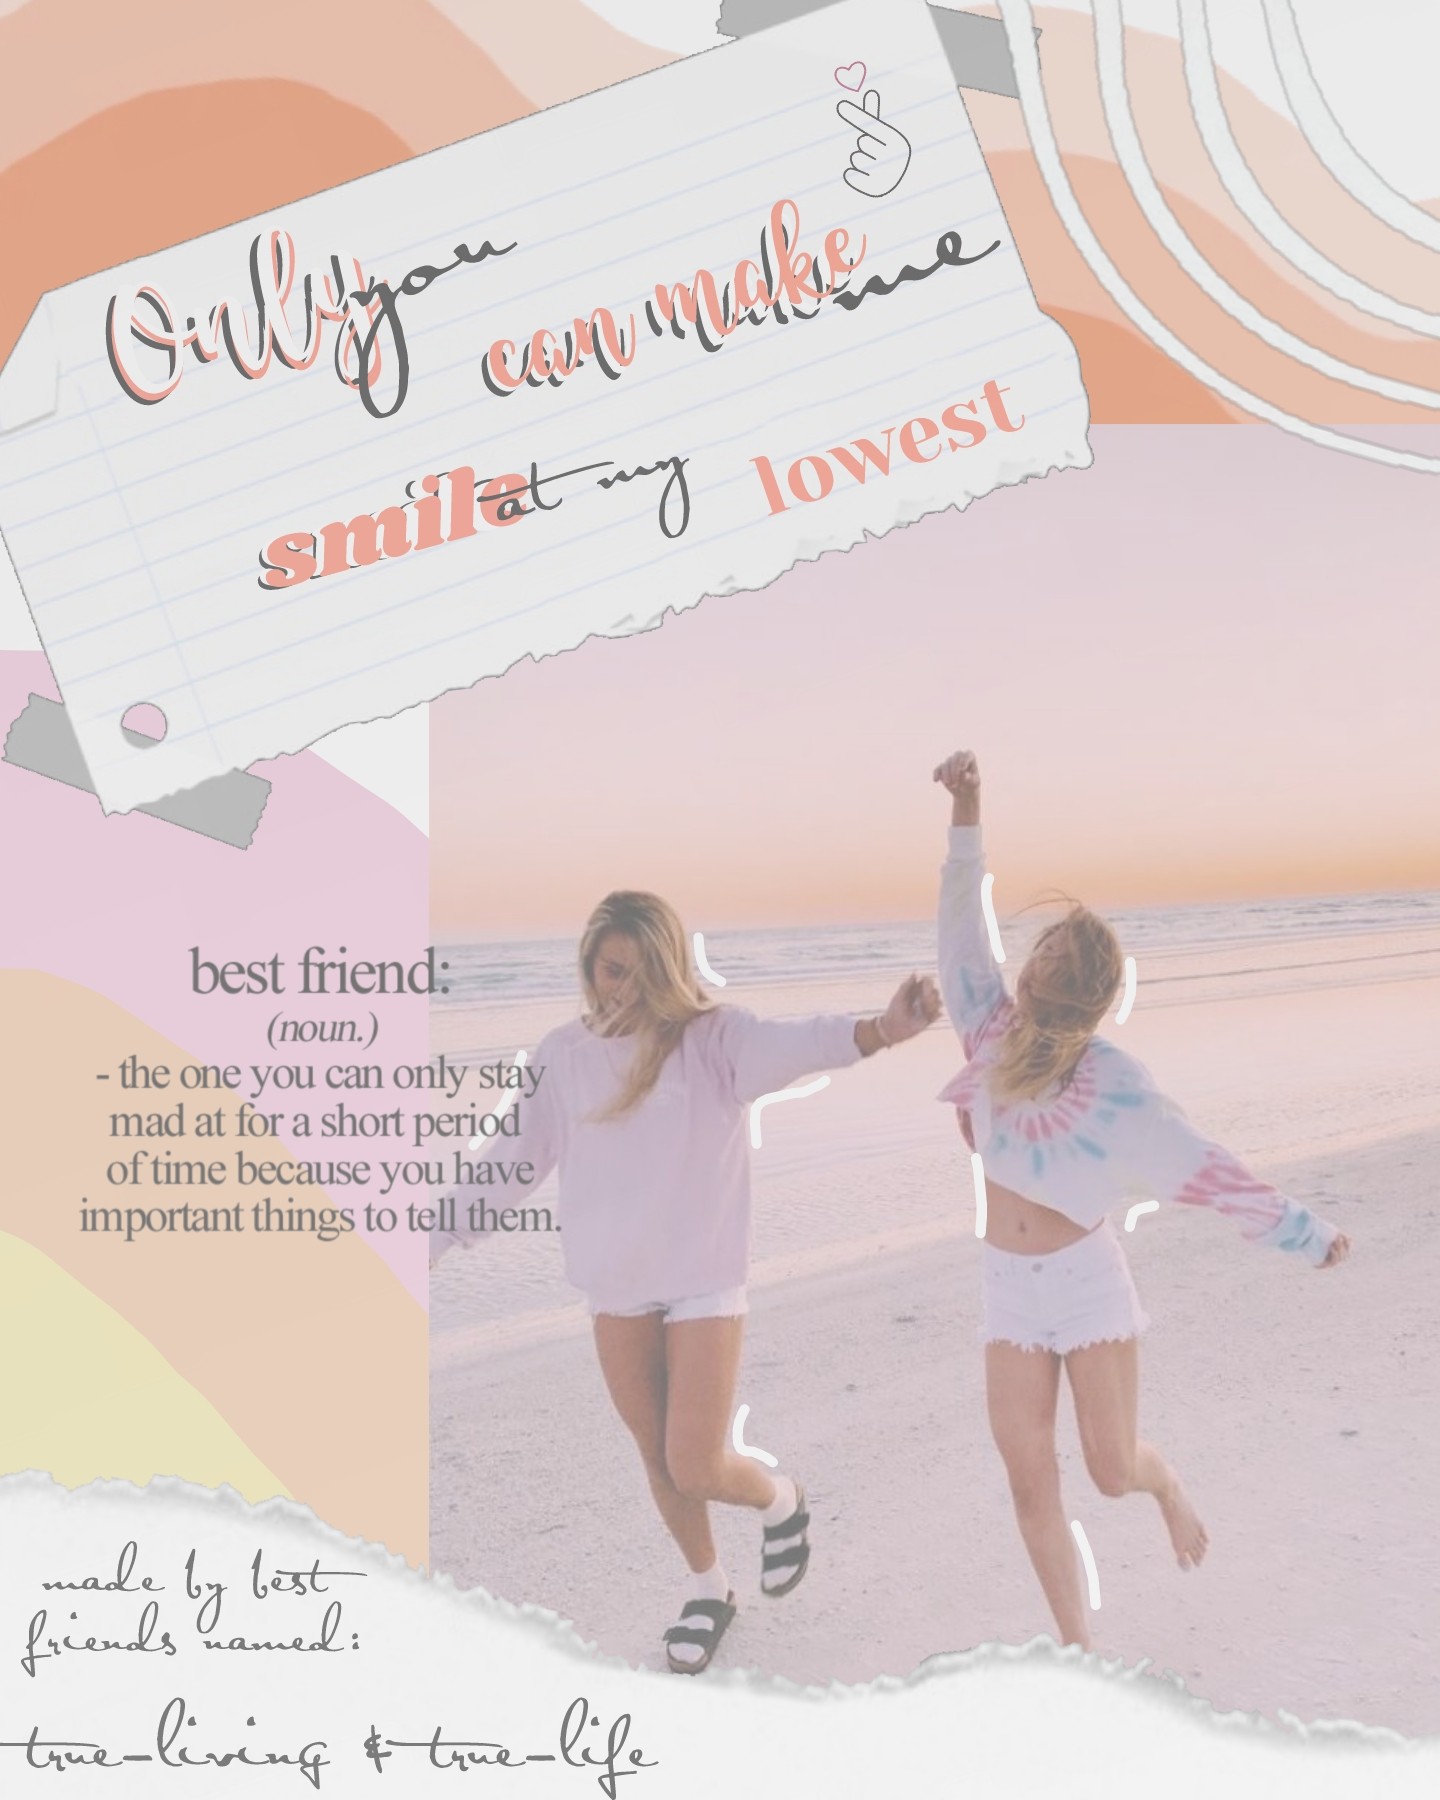 ☁️tap🧸
this was a collab with ma bestie! I did the bg she did the beautiful text! enjoy 😉